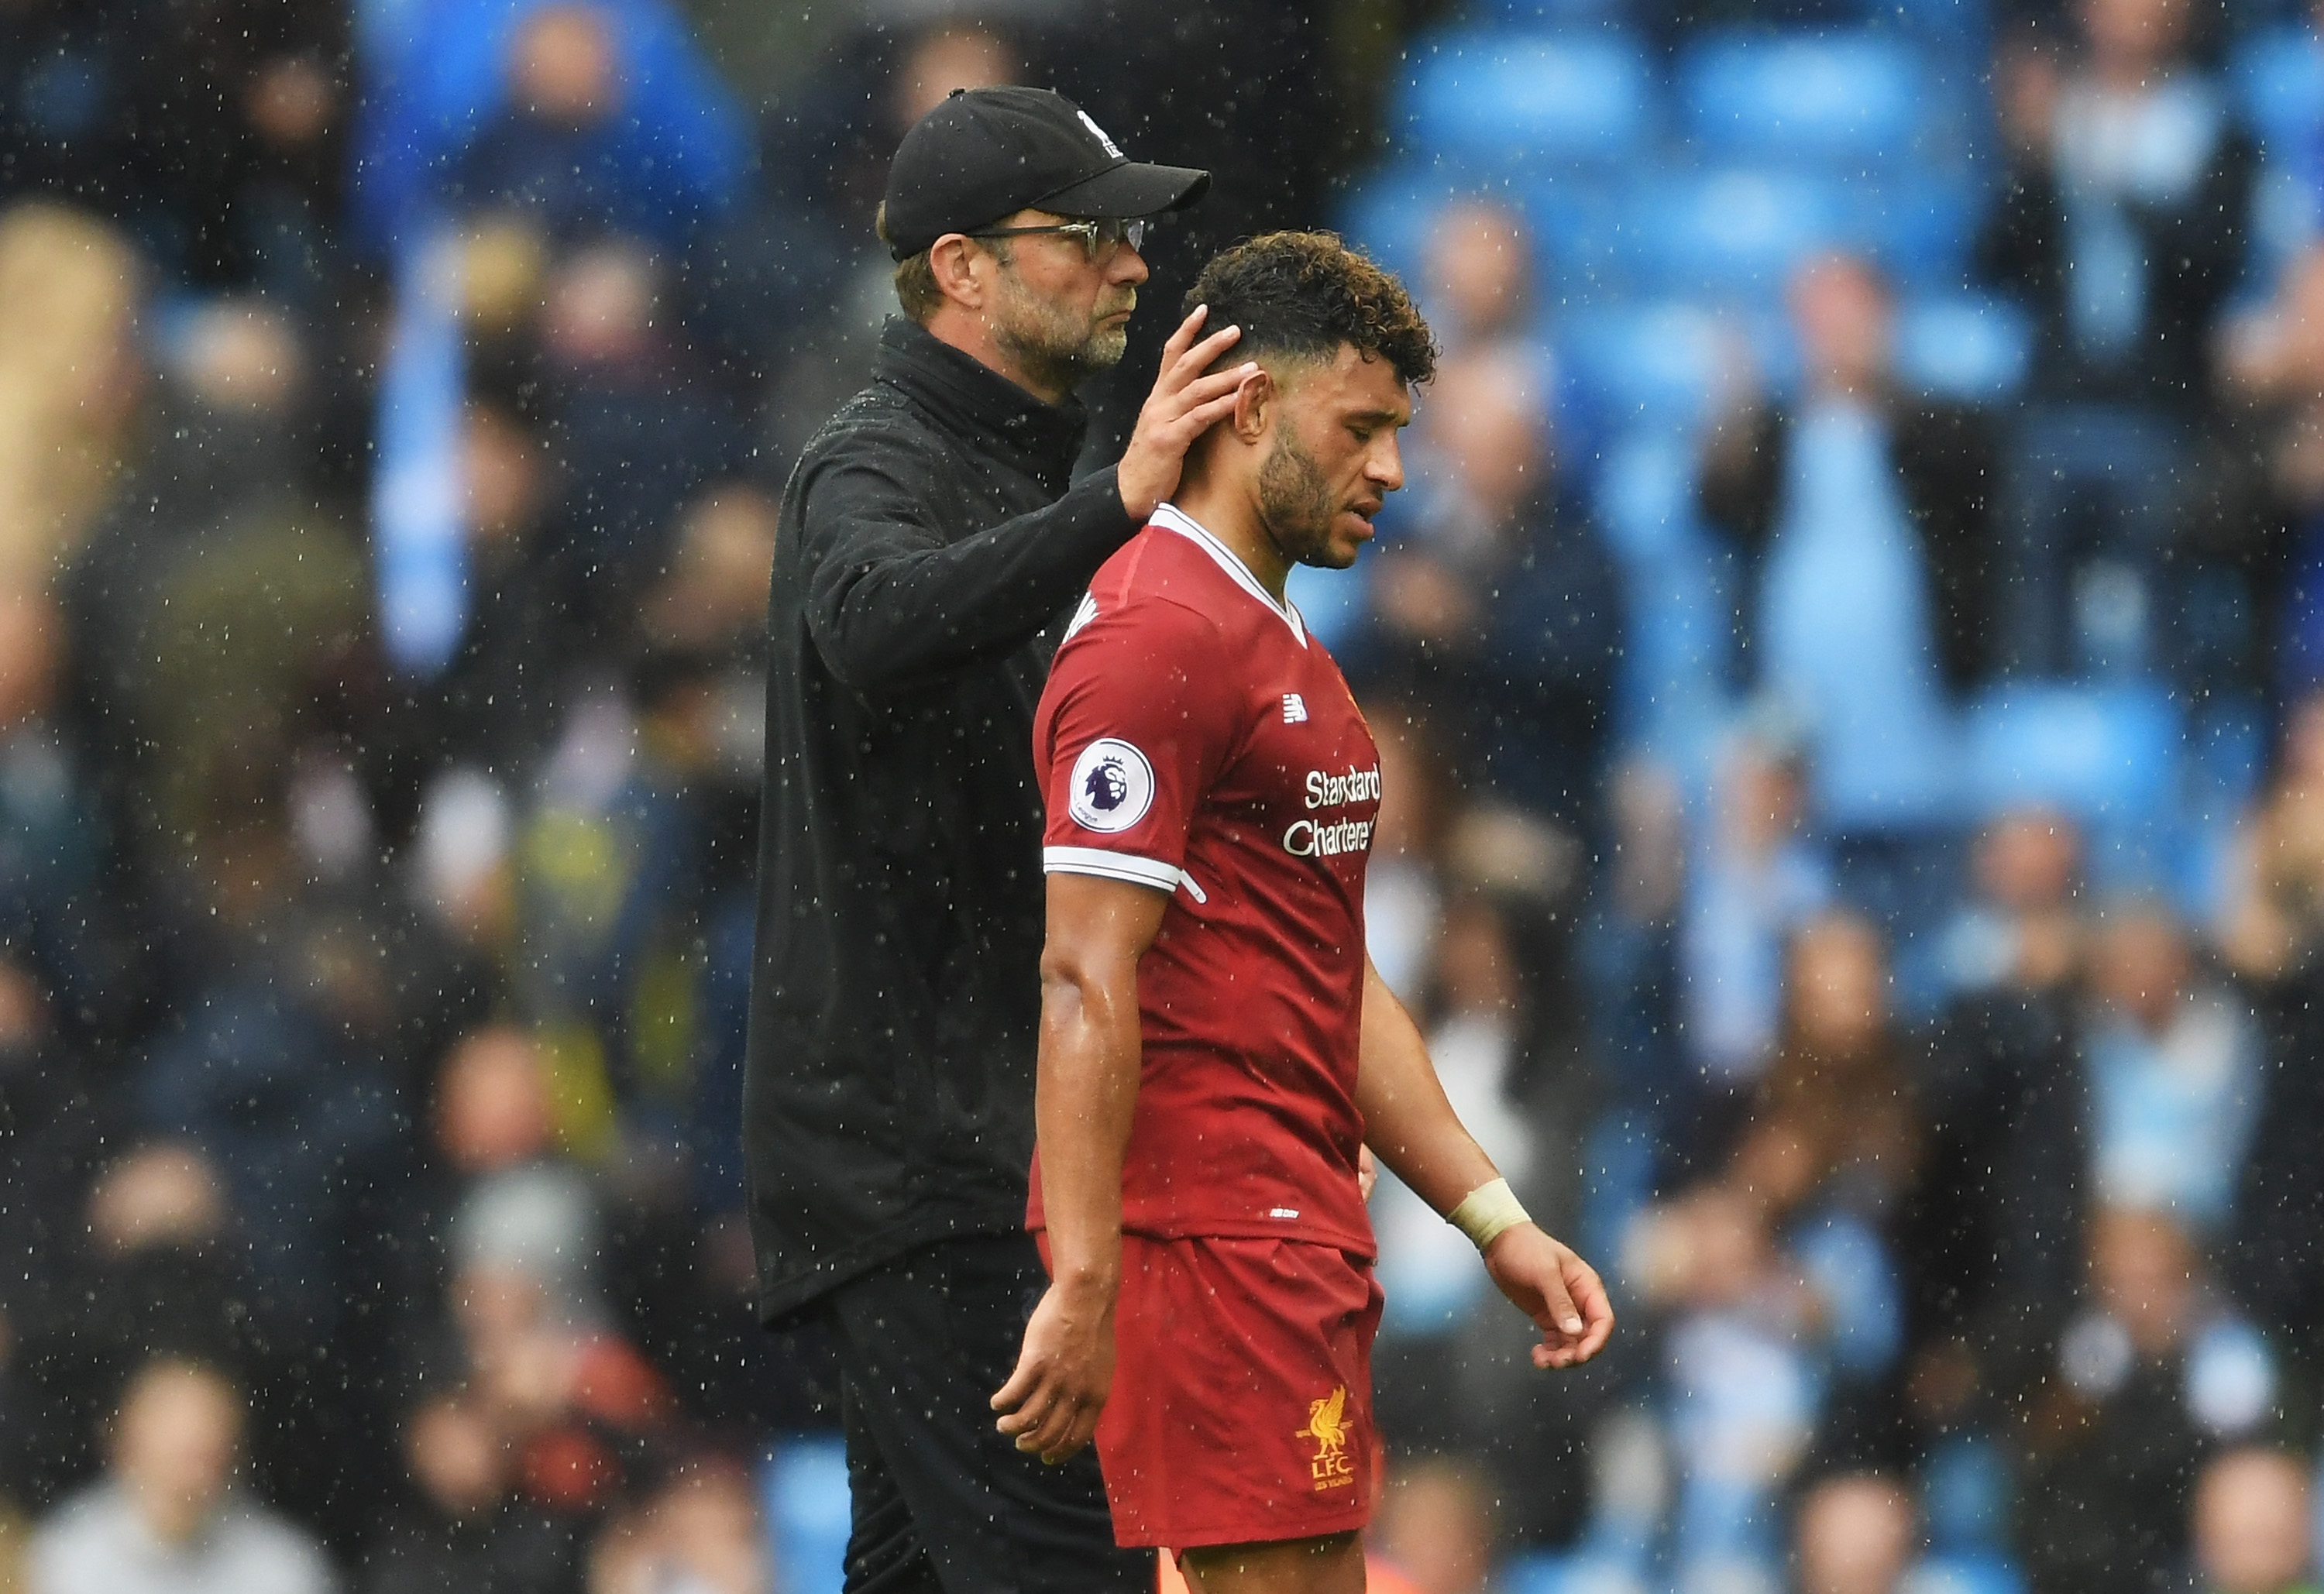 MANCHESTER, ENGLAND - SEPTEMBER 09:  Jurgen Klopp, Manager of Liverpool and Alex Oxlade-Chamberlain of Liverpool embrace after the Premier League match between Manchester City and Liverpool at Etihad Stadium on September 9, 2017 in Manchester, England.  (Photo by Laurence Griffiths/Getty Images)